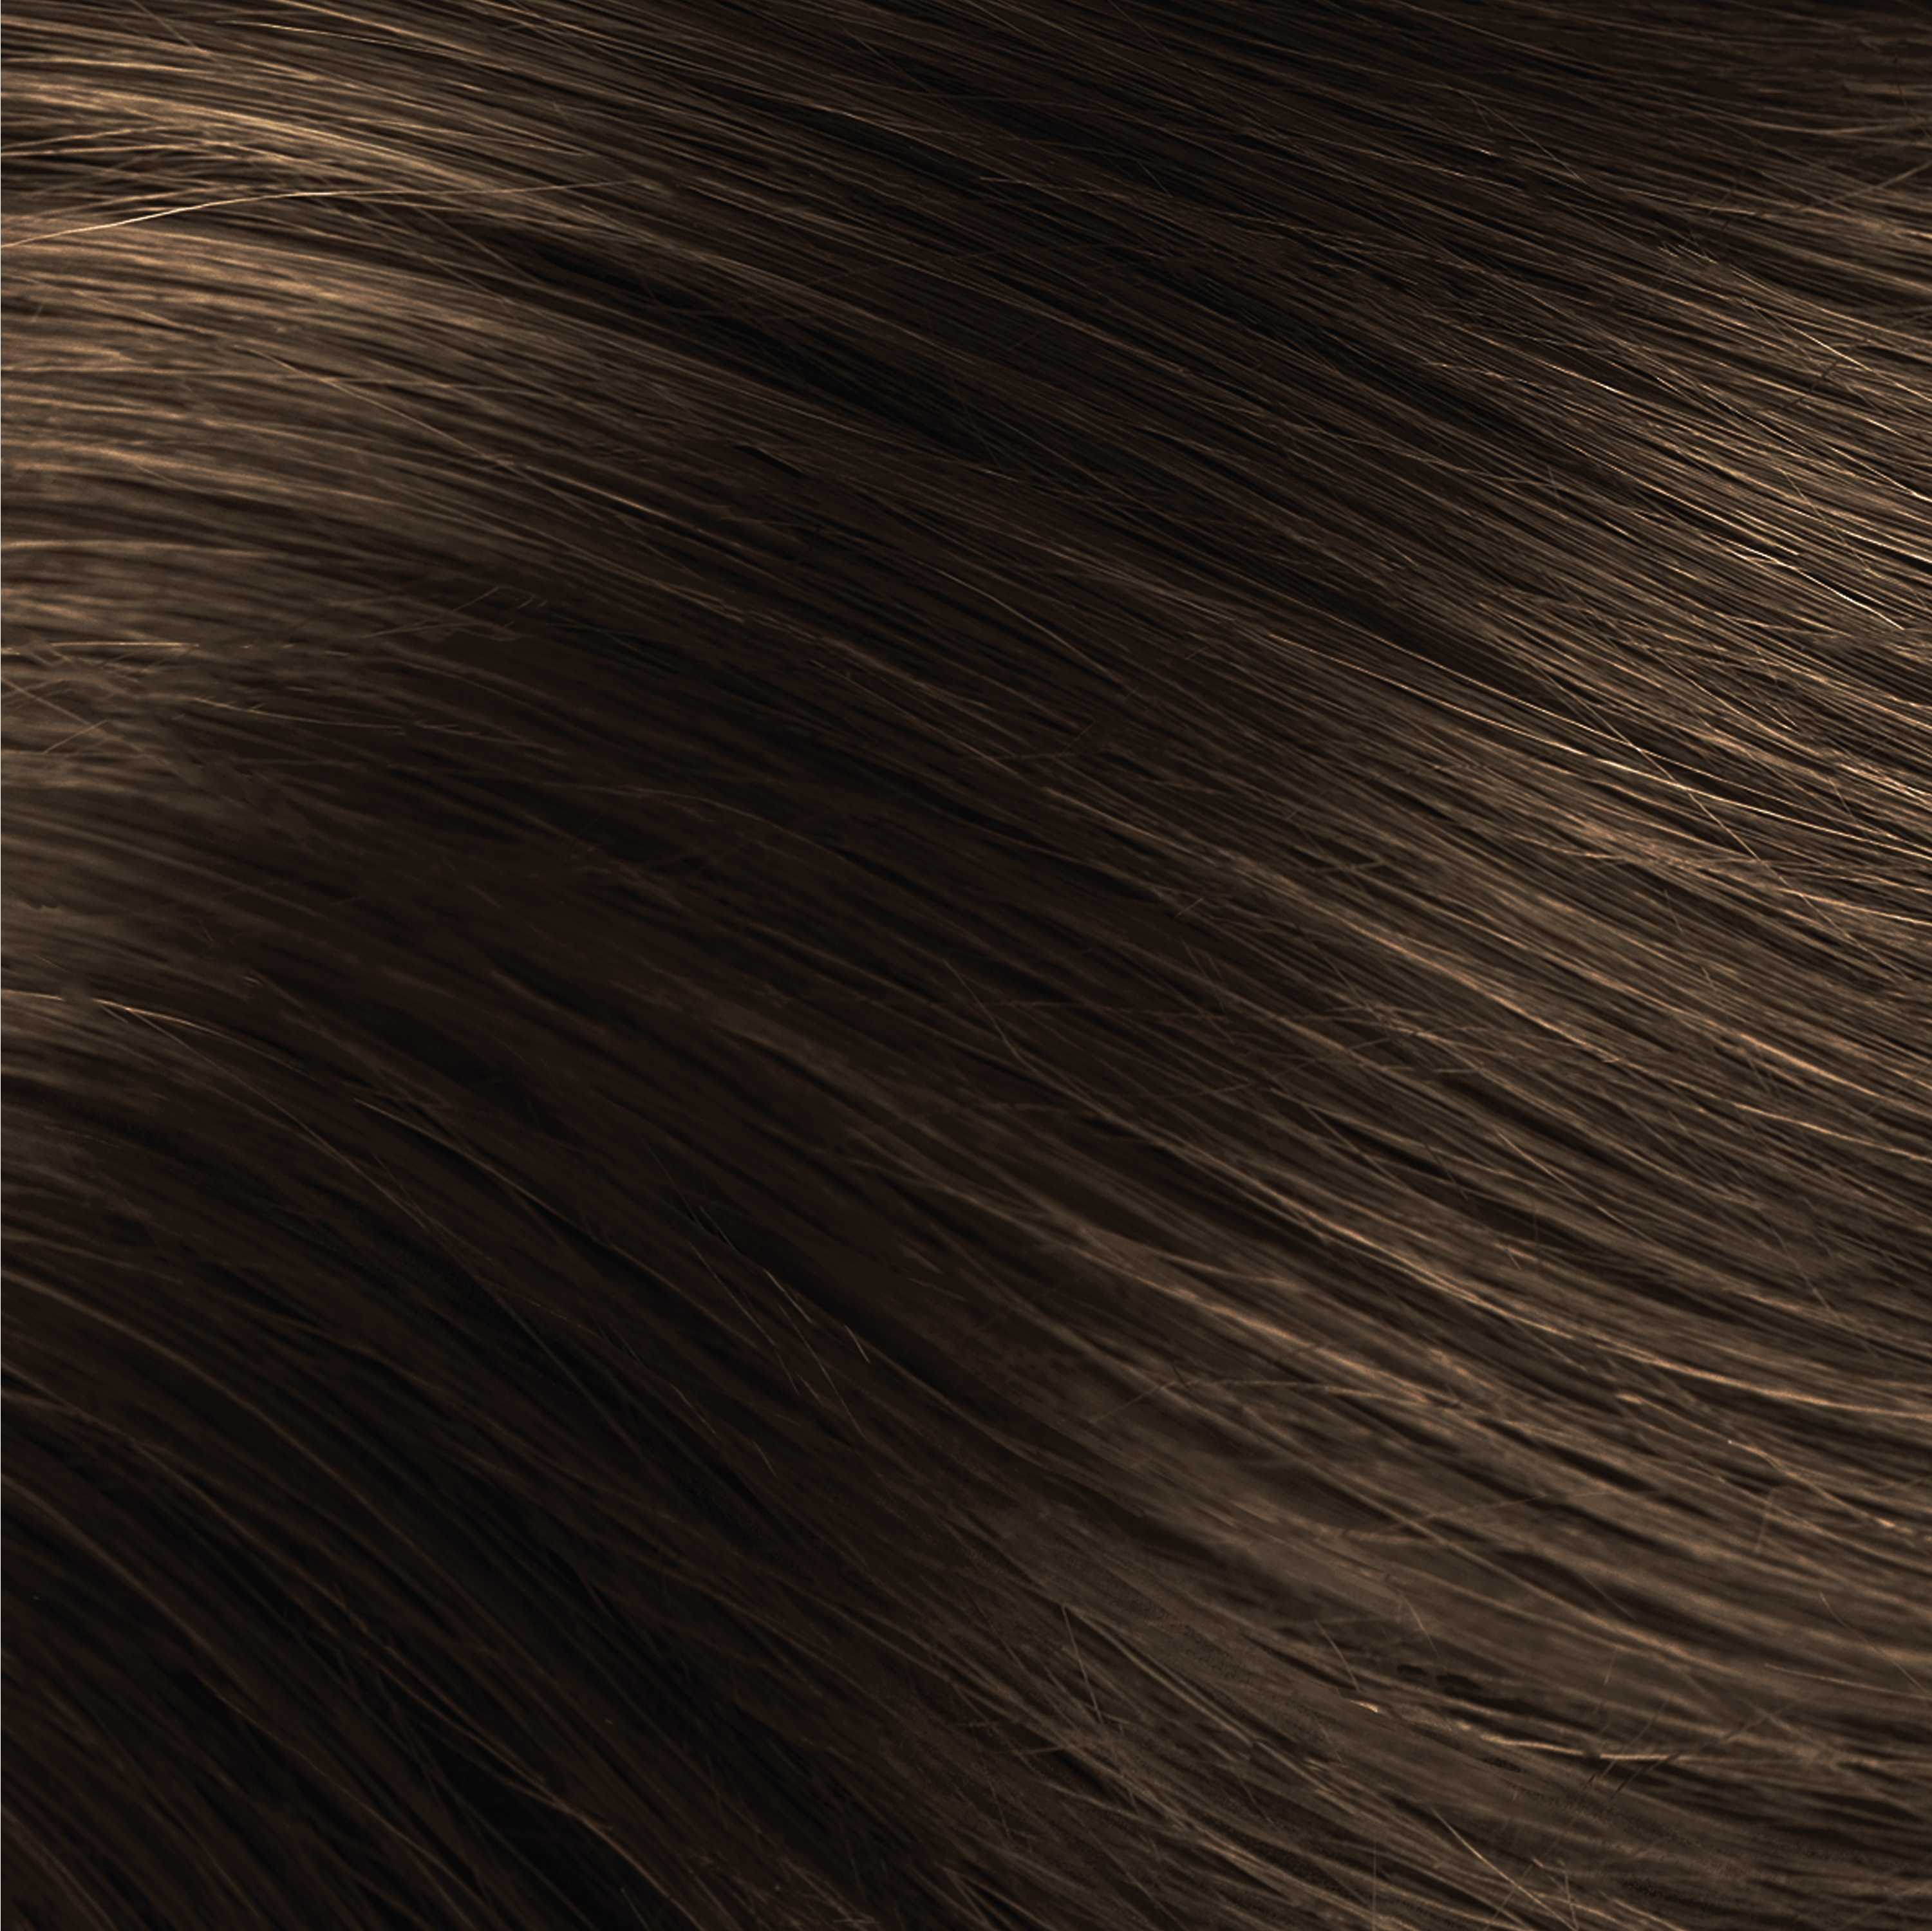 Fancifull 21 Plush Brown Temporary Hair Color, 9 Fl Oz - image 5 of 5